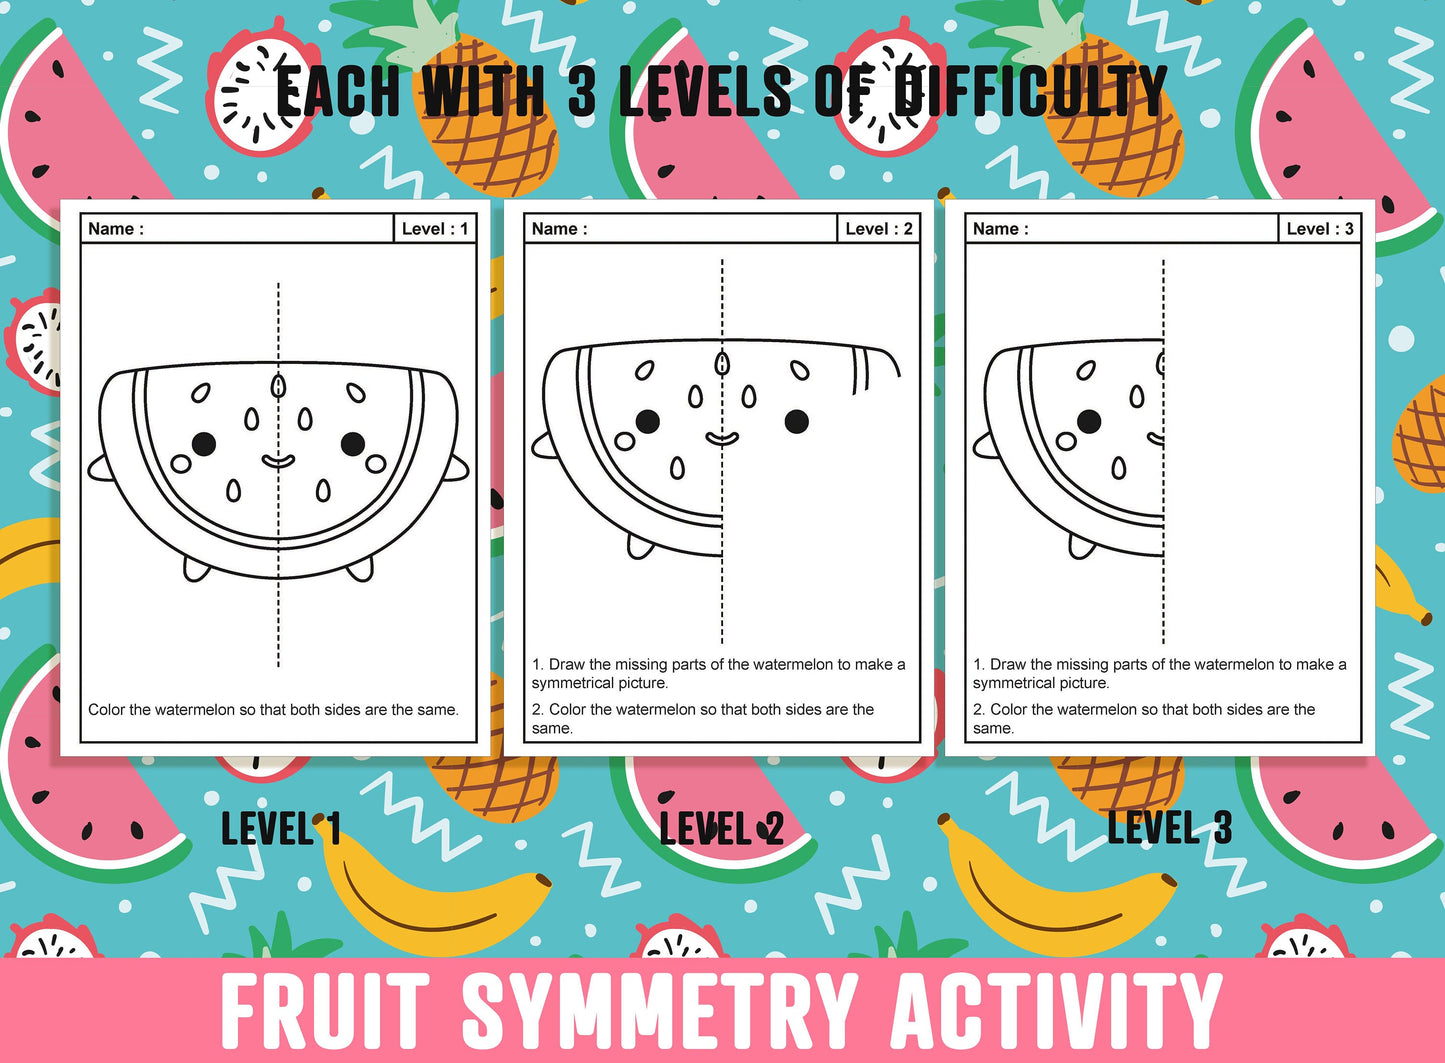 Fruit Symmetry Worksheet, Fruit Theme Lines of Symmetry Activity, 24 Pages, Includes 8 Designs, Each With 3 Levels of Difficulty